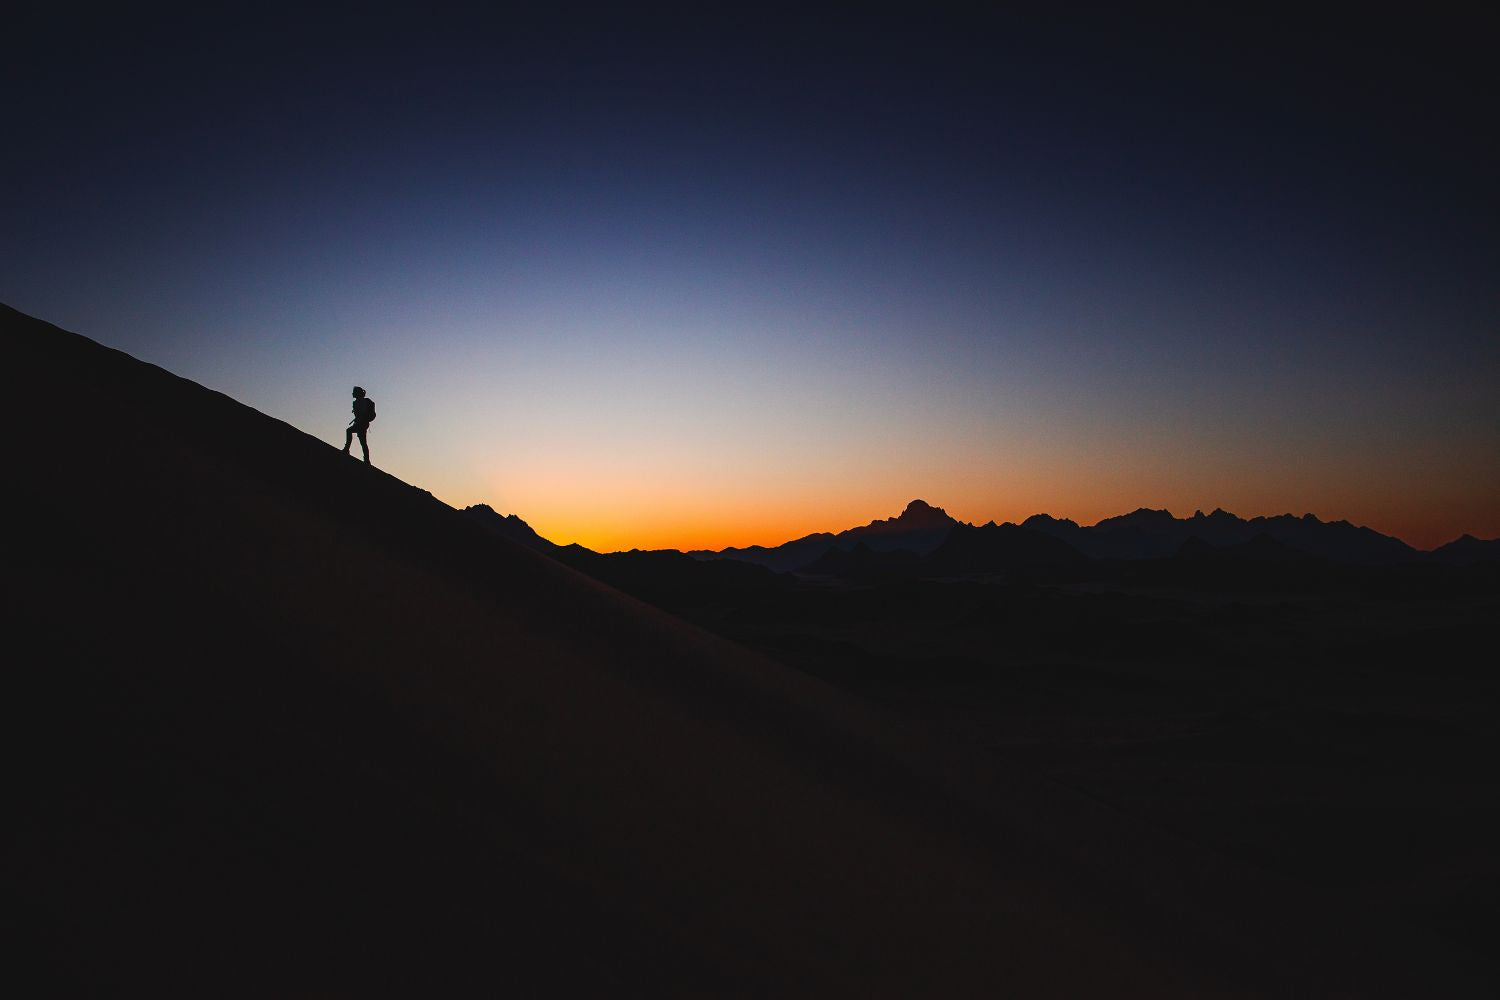 man is climbing a mountain alone in the sunset